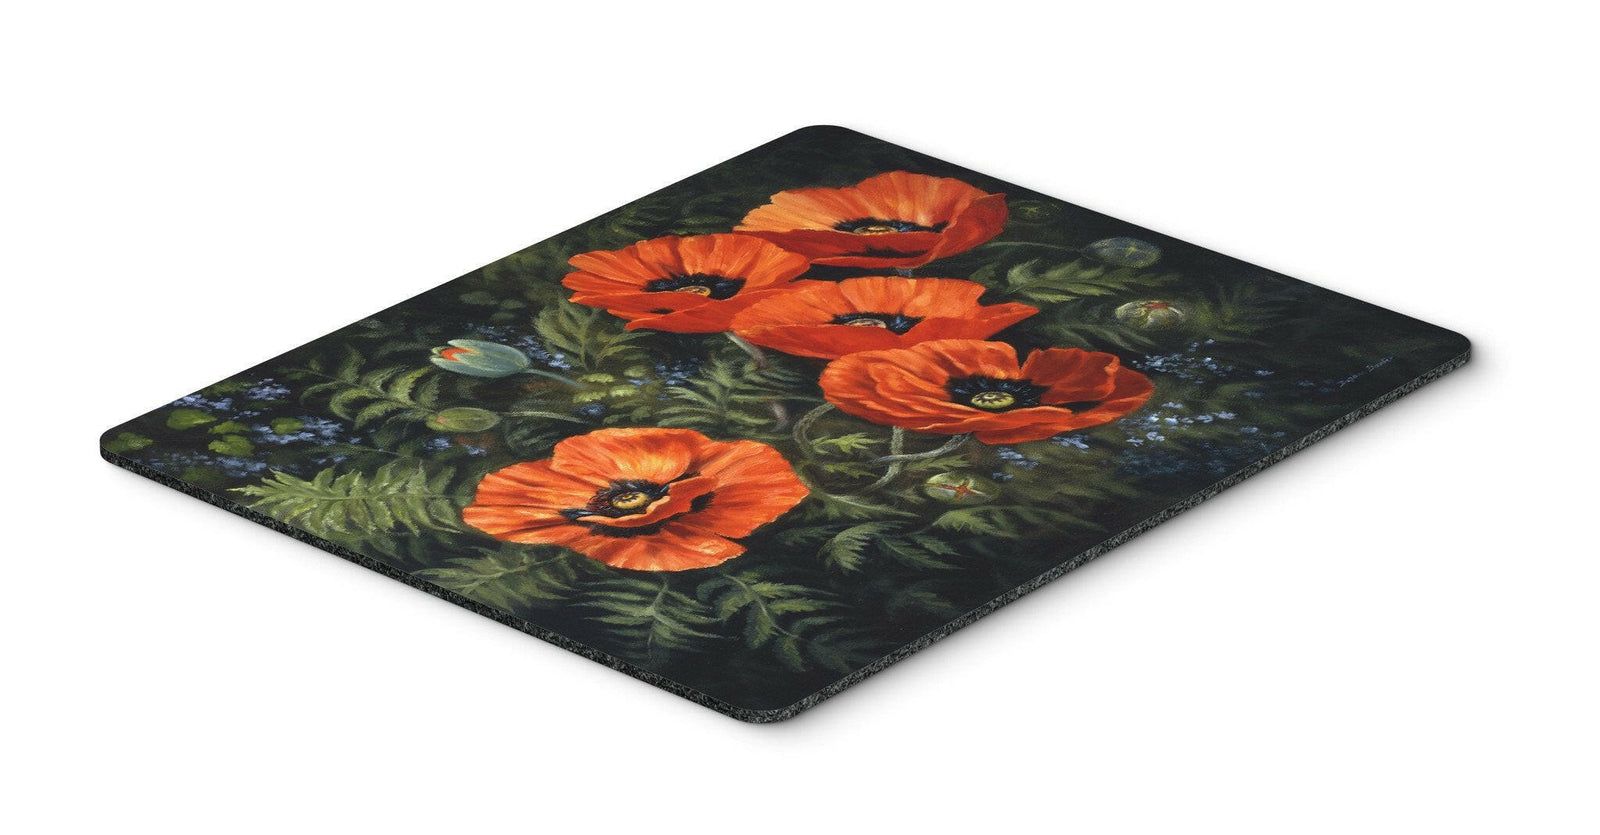 Poppies by Daphne Baxter Mouse Pad, Hot Pad or Trivet BDBA0007MP by Caroline's Treasures